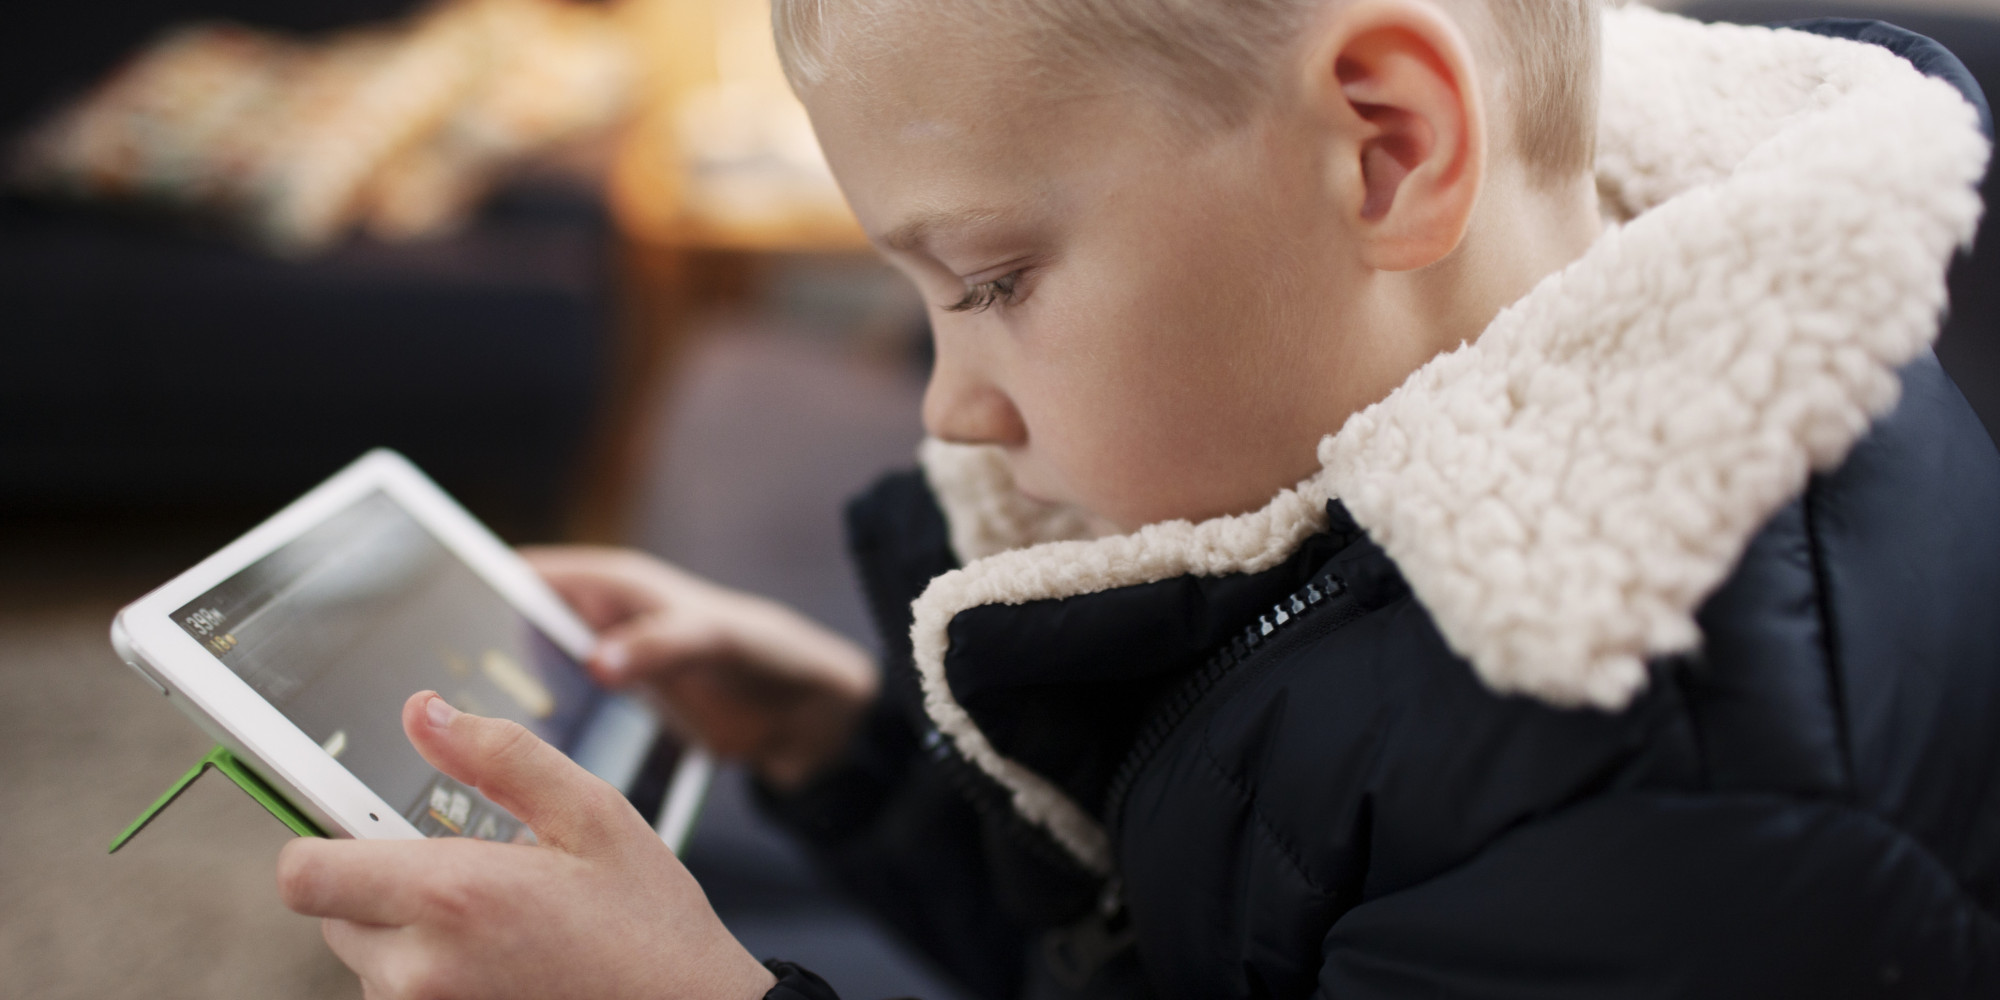 Can We Stop Judging Each Other When Our Tots Play With Tablets? | HuffPost